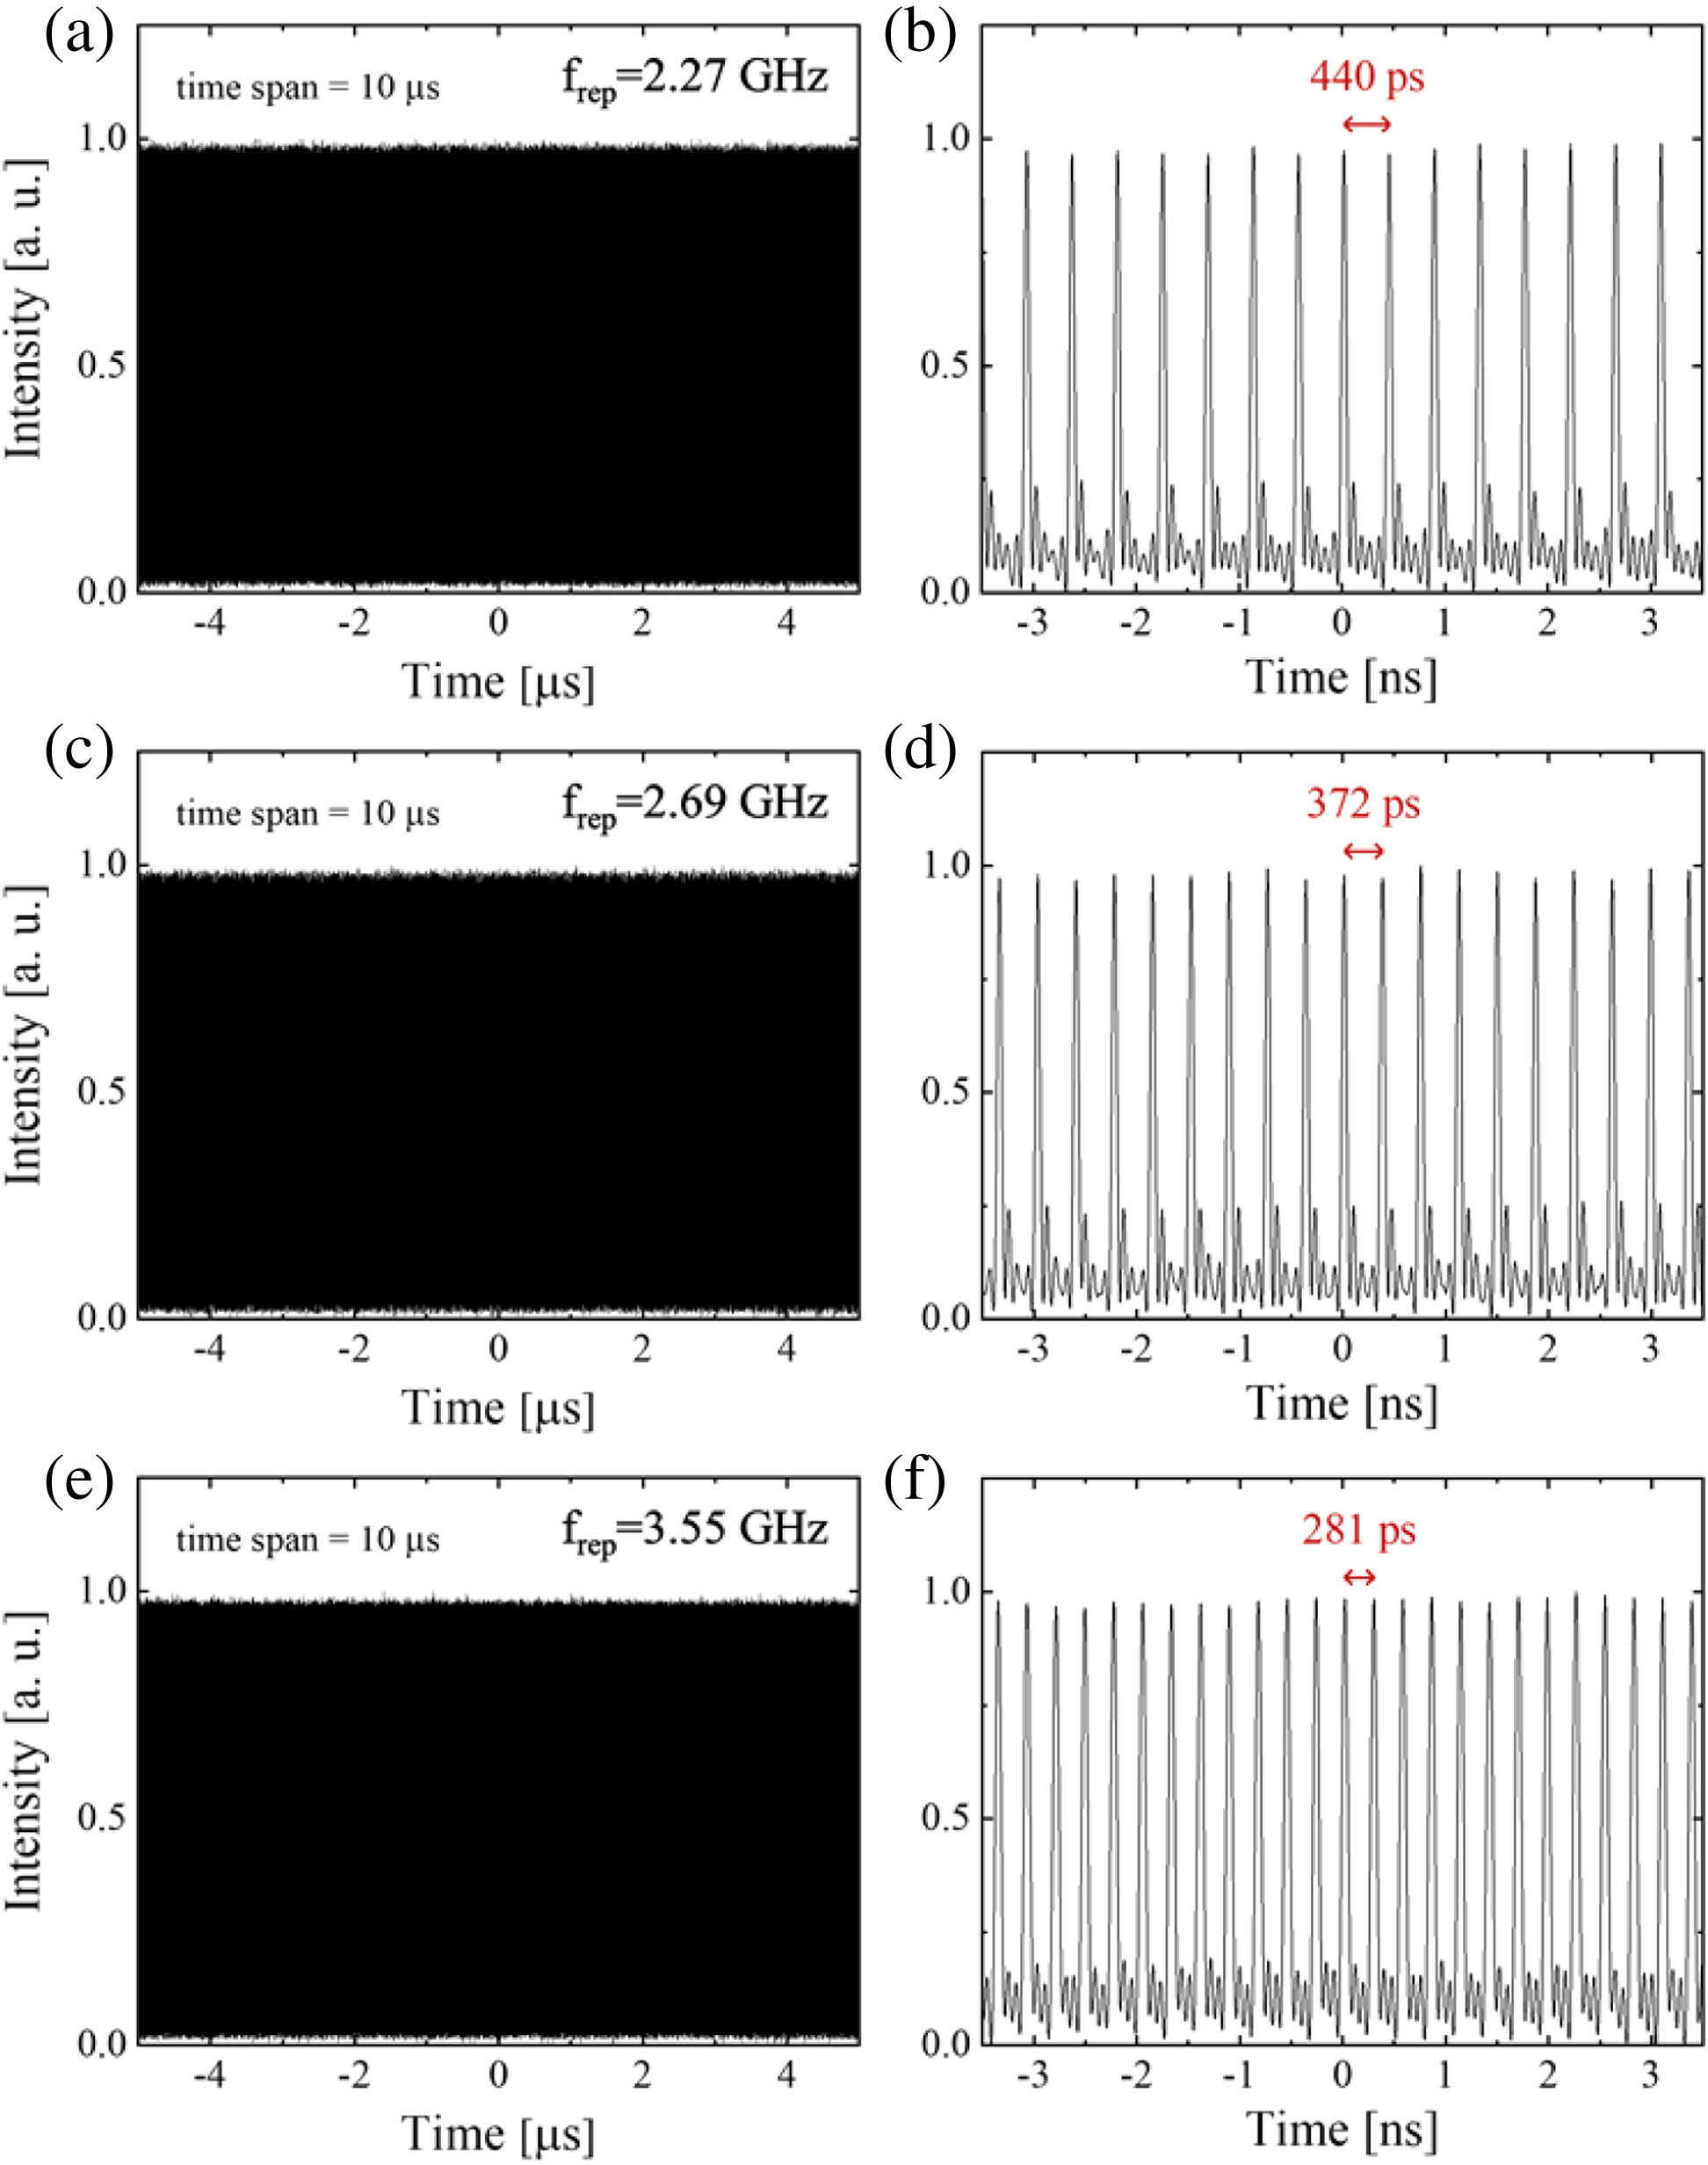 Oscilloscope traces of the mode-locked pulses at repetition frequencies of (a), (b) 2.27 GHz, (c), (d) 2.69 GHz, and (e), (f) 3.55 GHz in different time spans of 10 μs and 7 ns.